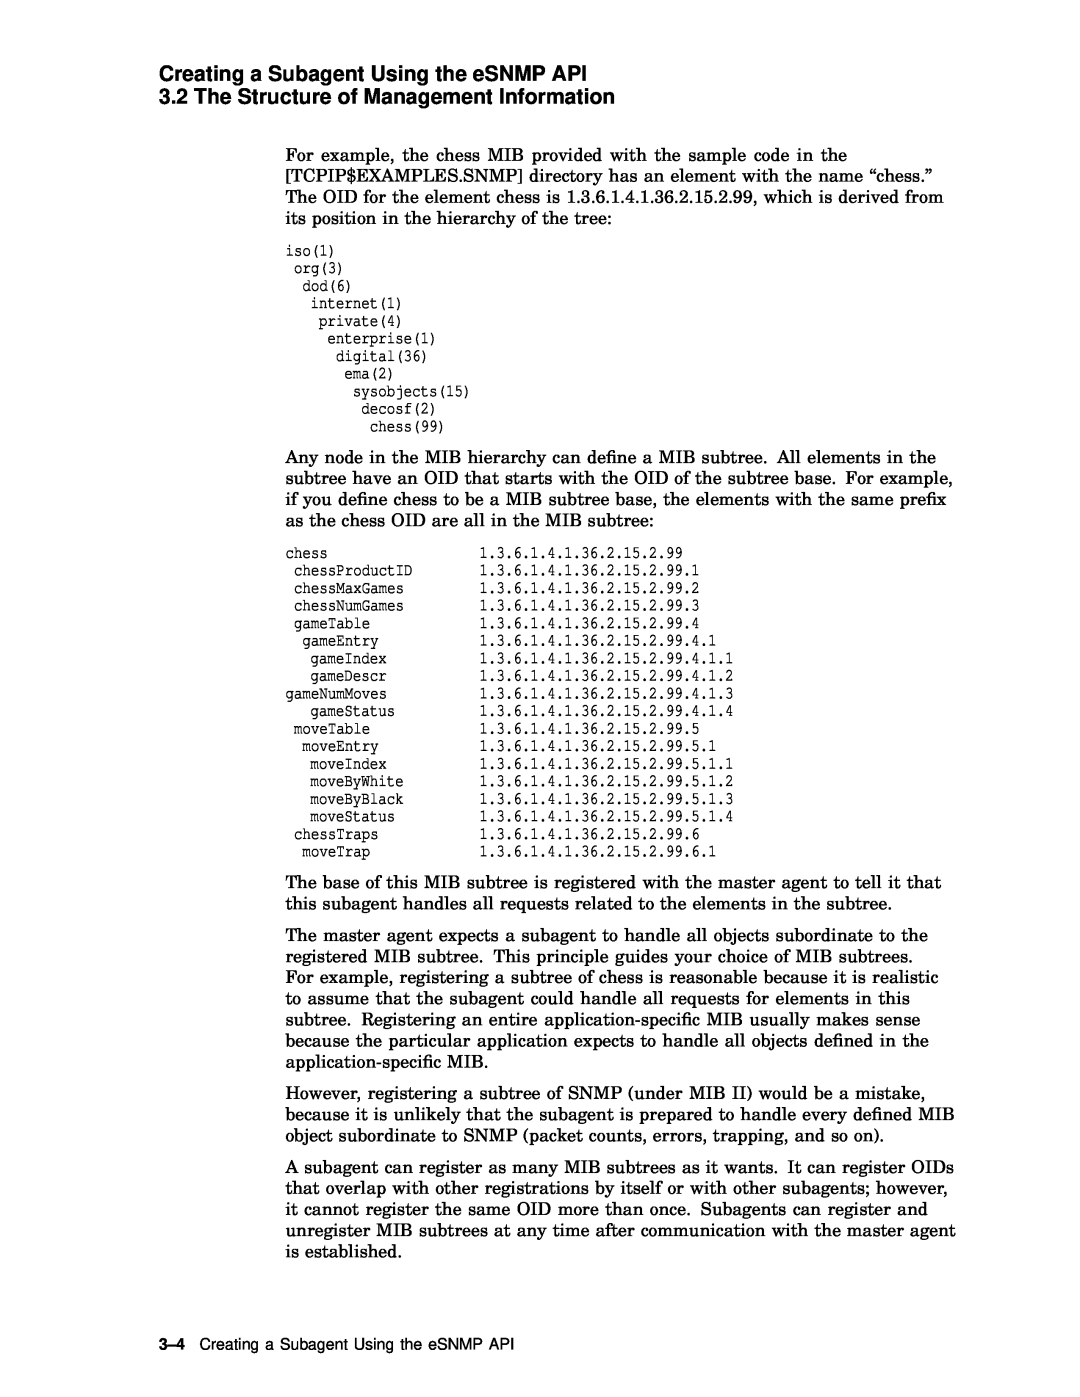 Compaq AAR04BCTE manual Creating a Subagent Using the eSNMP API, The Structure of Management Information 